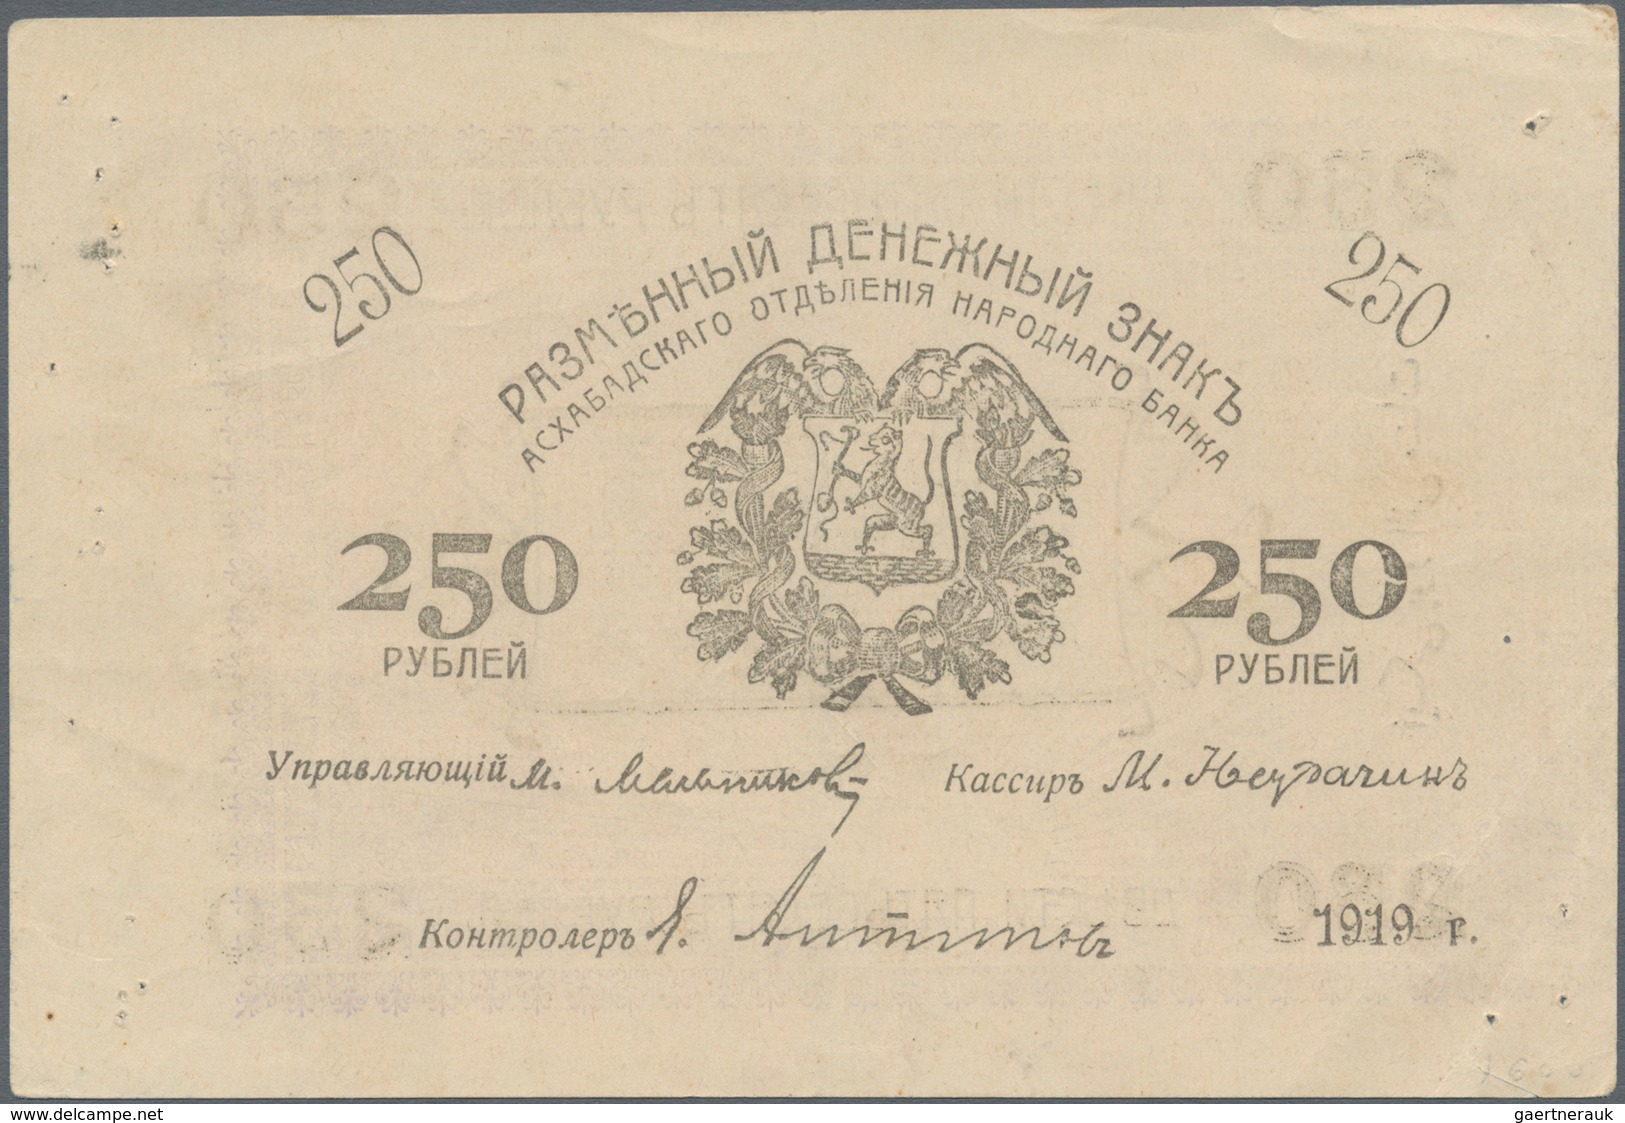 Russia / Russland: Central Asia – Ashkhabad 250 Rubles 1919, P.S1146 Without Underprint Color. Condi - Russia